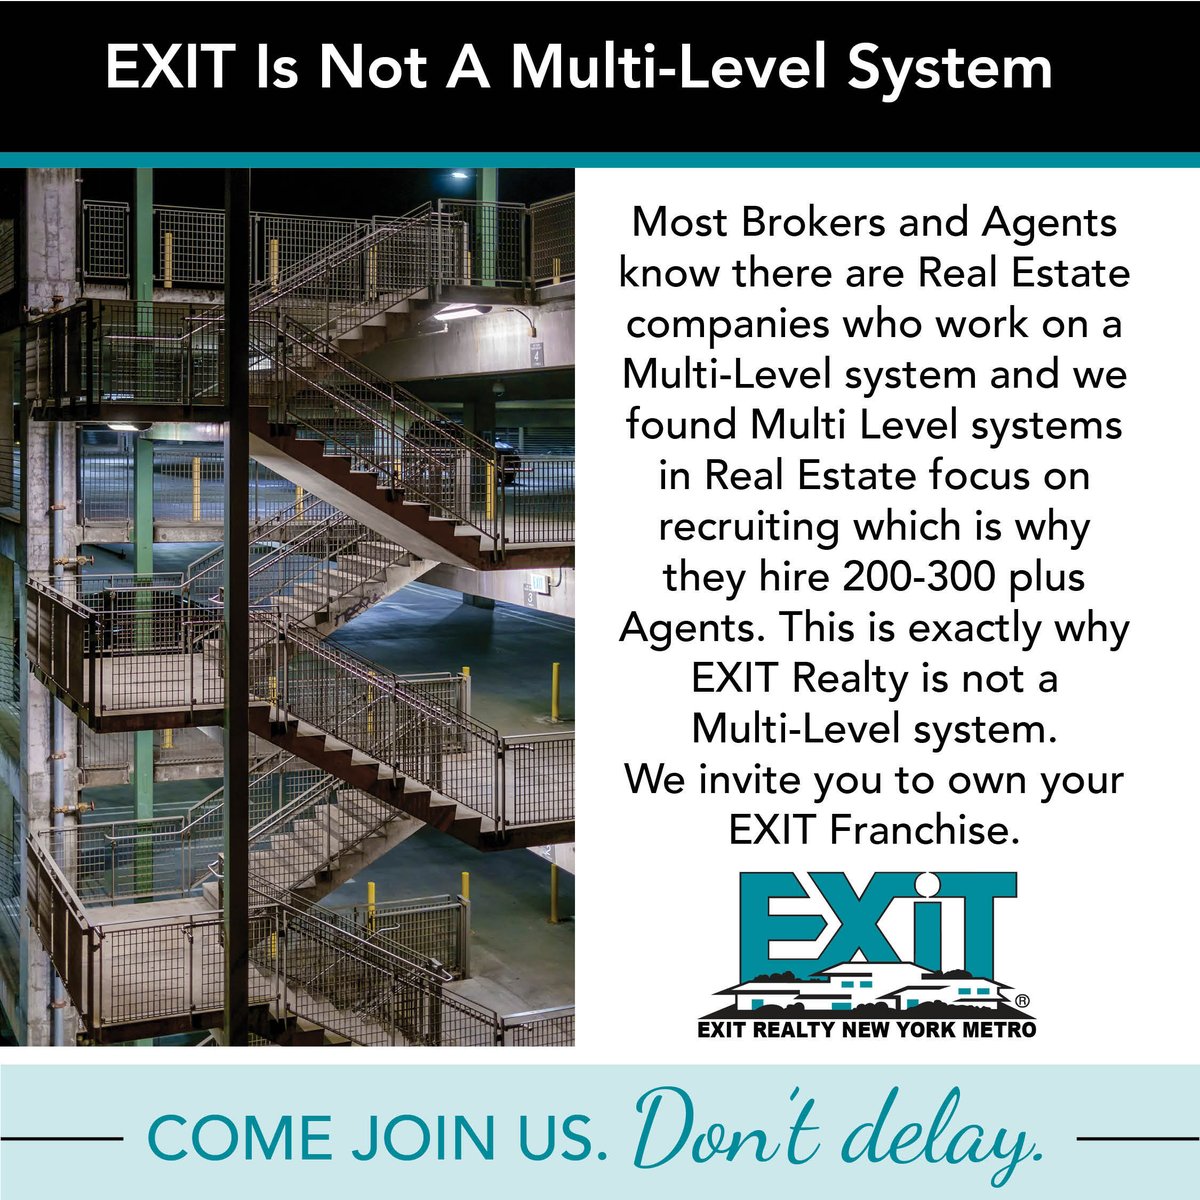 EXIT is not a Multi-Level System!
Visit JoinEXITRealty.com to learn more about the EXIT Formula.

#realty #RealEstate #EXITRealty #NewYorkMetro #success #bestinclass #advertising #marketing #passiveincome #financialfreedom #realestatecareers #LovEXIT #JoinEXIT